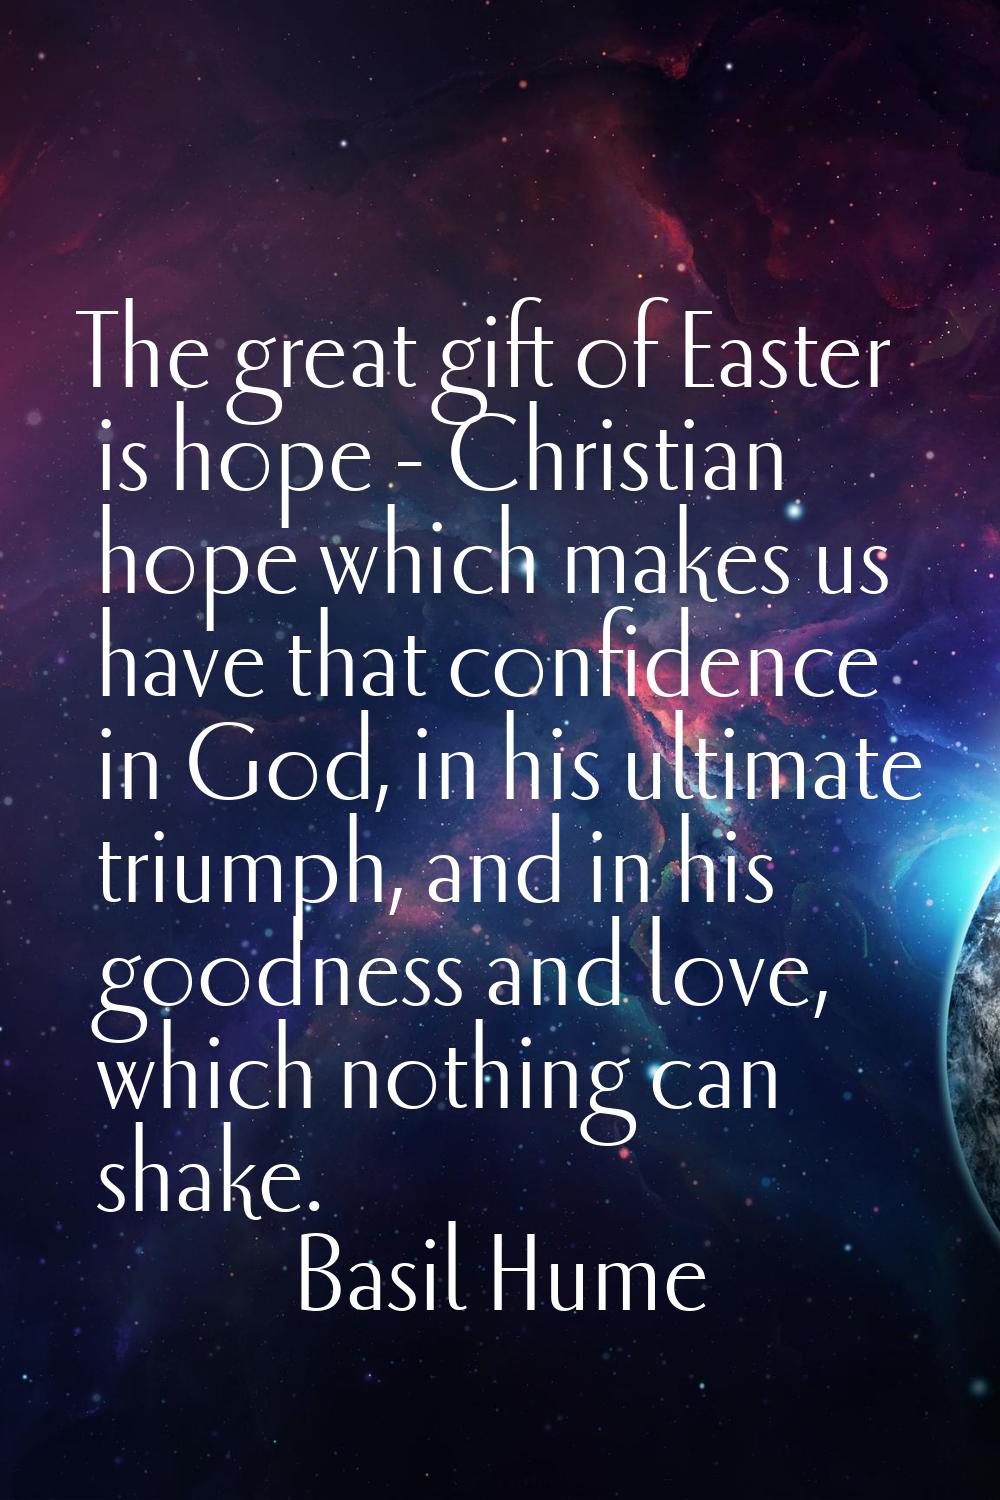 The great gift of Easter is hope - Christian hope which makes us have that confidence in God, in hi